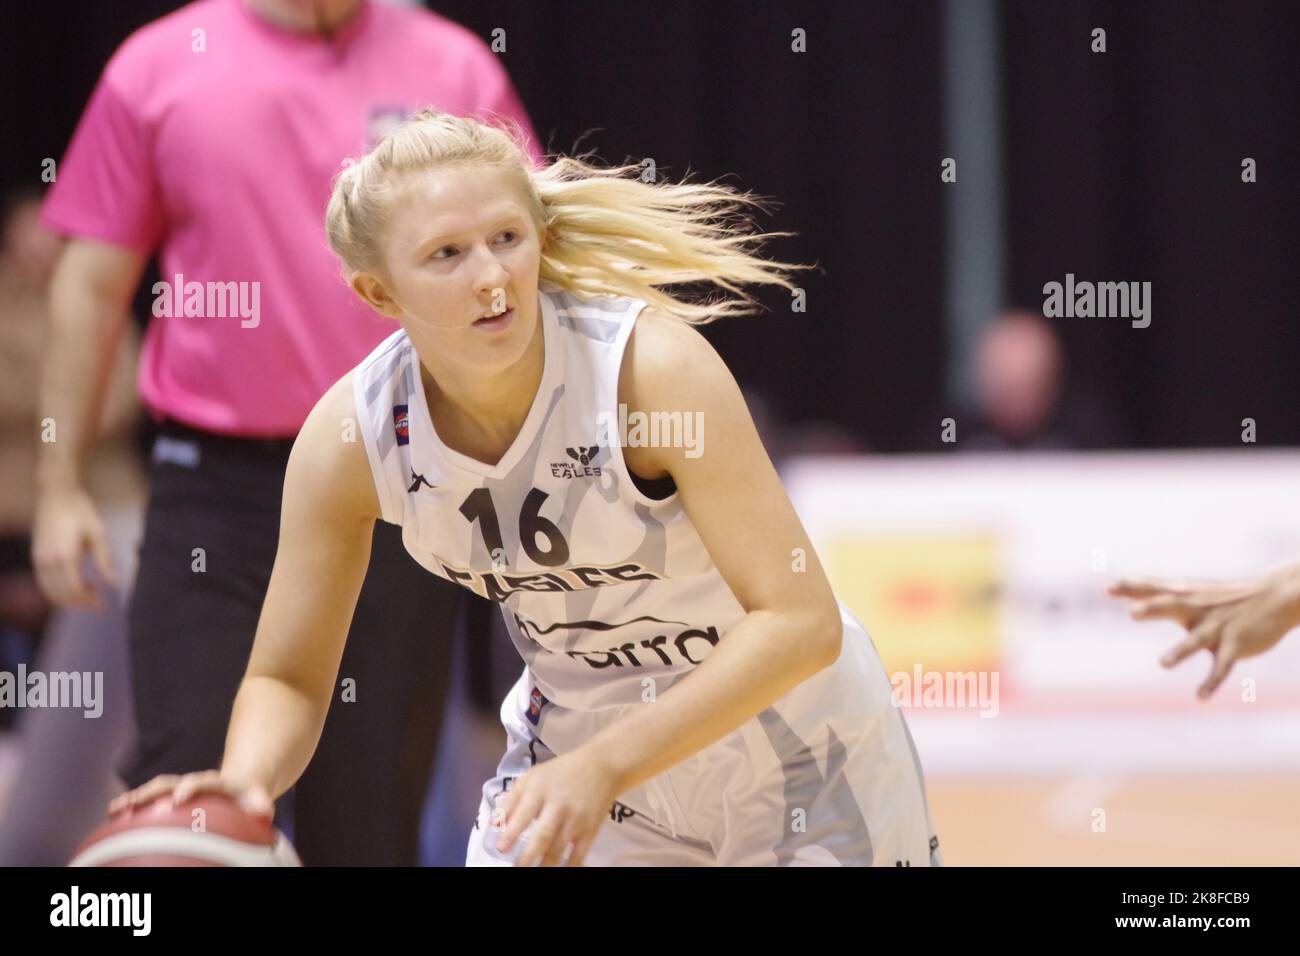 Sheffield, England, 23 October 2022. Mollie Arnold playing for Newcastle Eagles against Sheffield Hatters in a WBBL match at Ponds Forge. Credit: Colin Edwards/Alamy Live News. Stock Photo